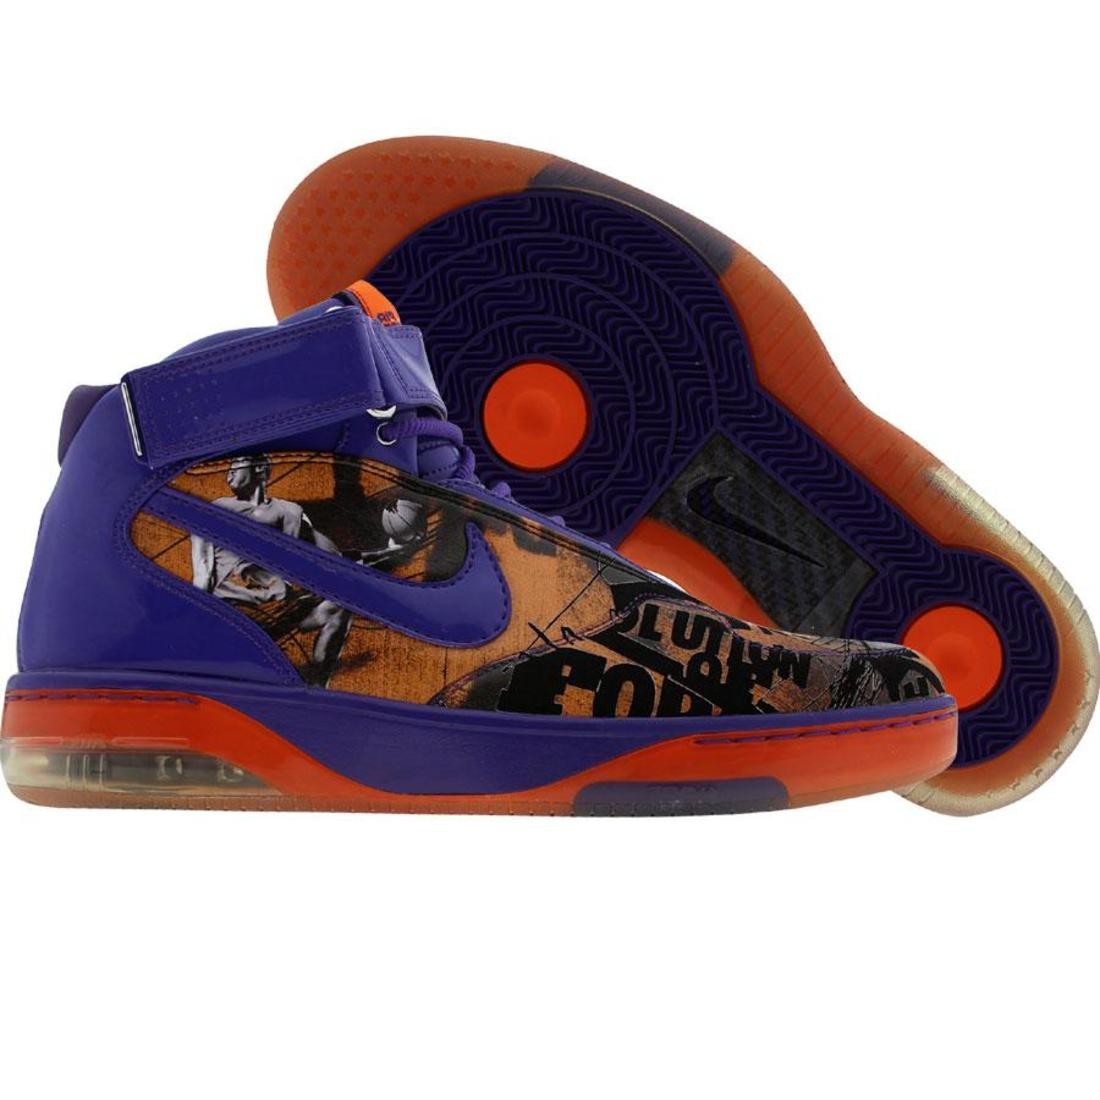 Nike Air Force 25 6 Pack 2007 NBA All Star Release - Amare Stoudemire Edition (safety orange / varsity purple)